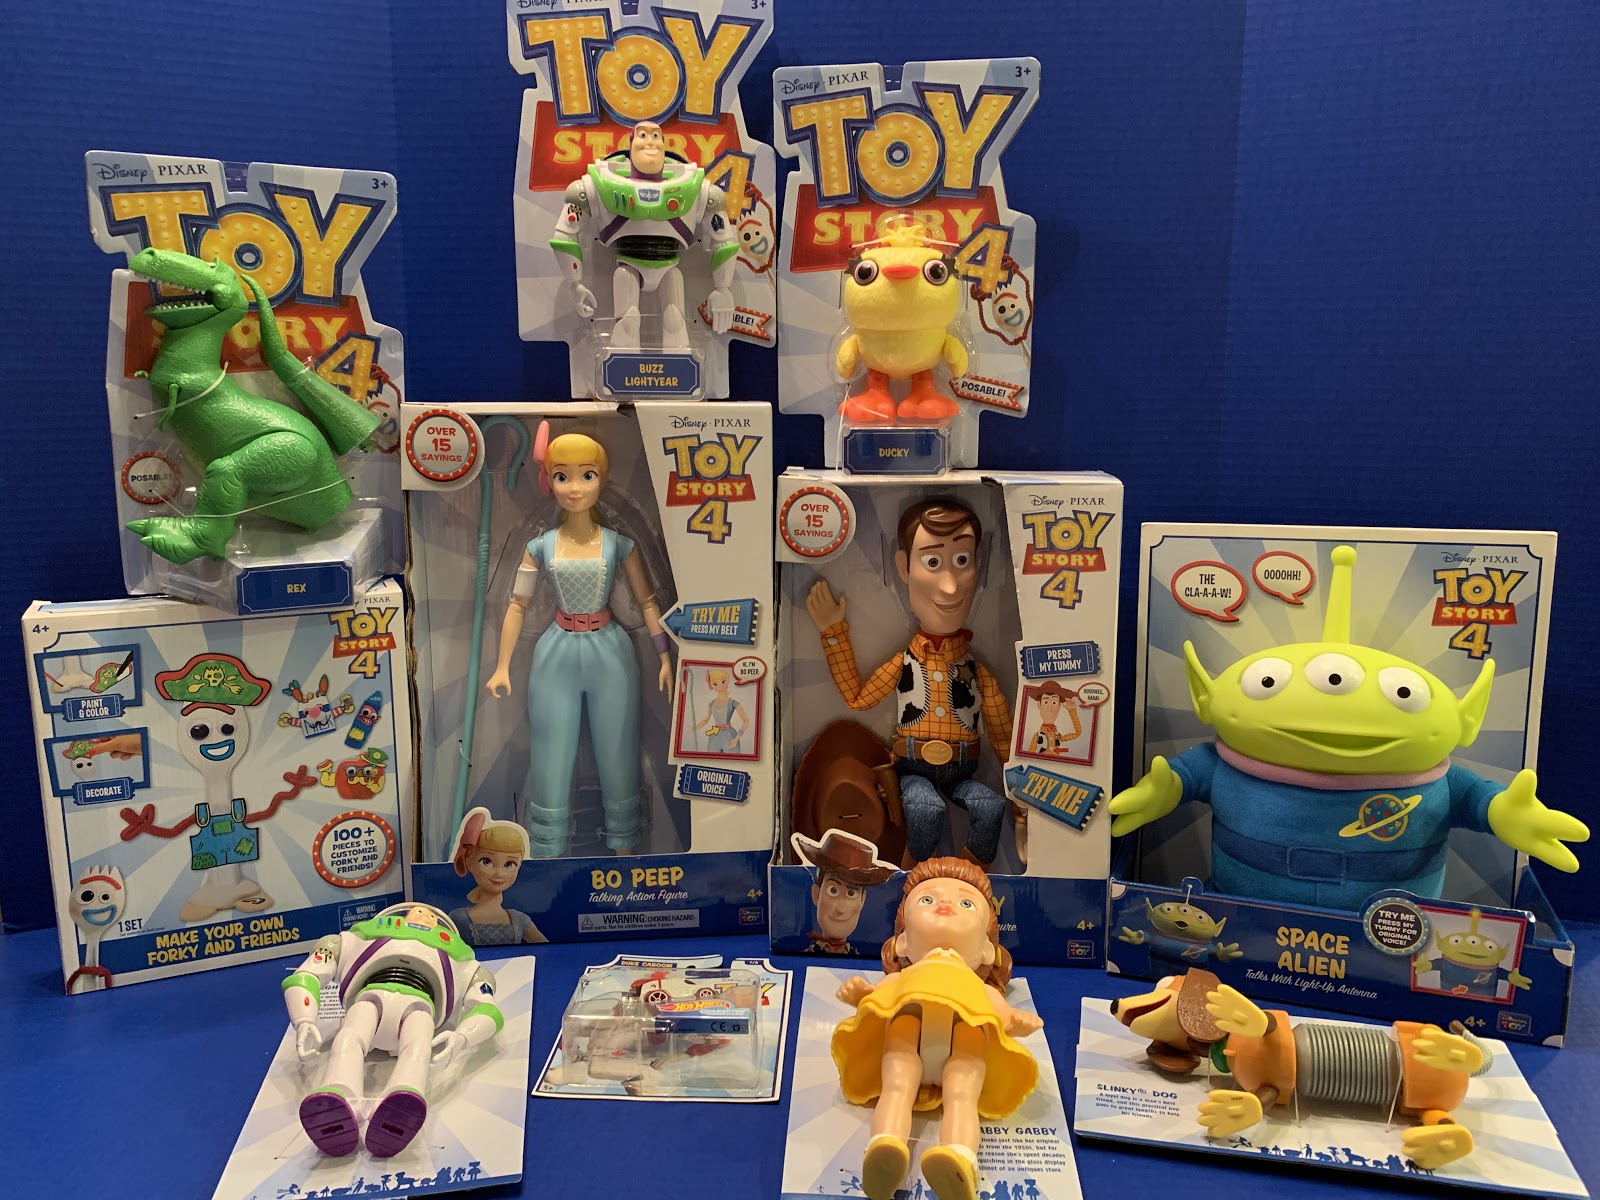 Toy Story 4 Announced! Your Favorite Toys are Returning to the Big